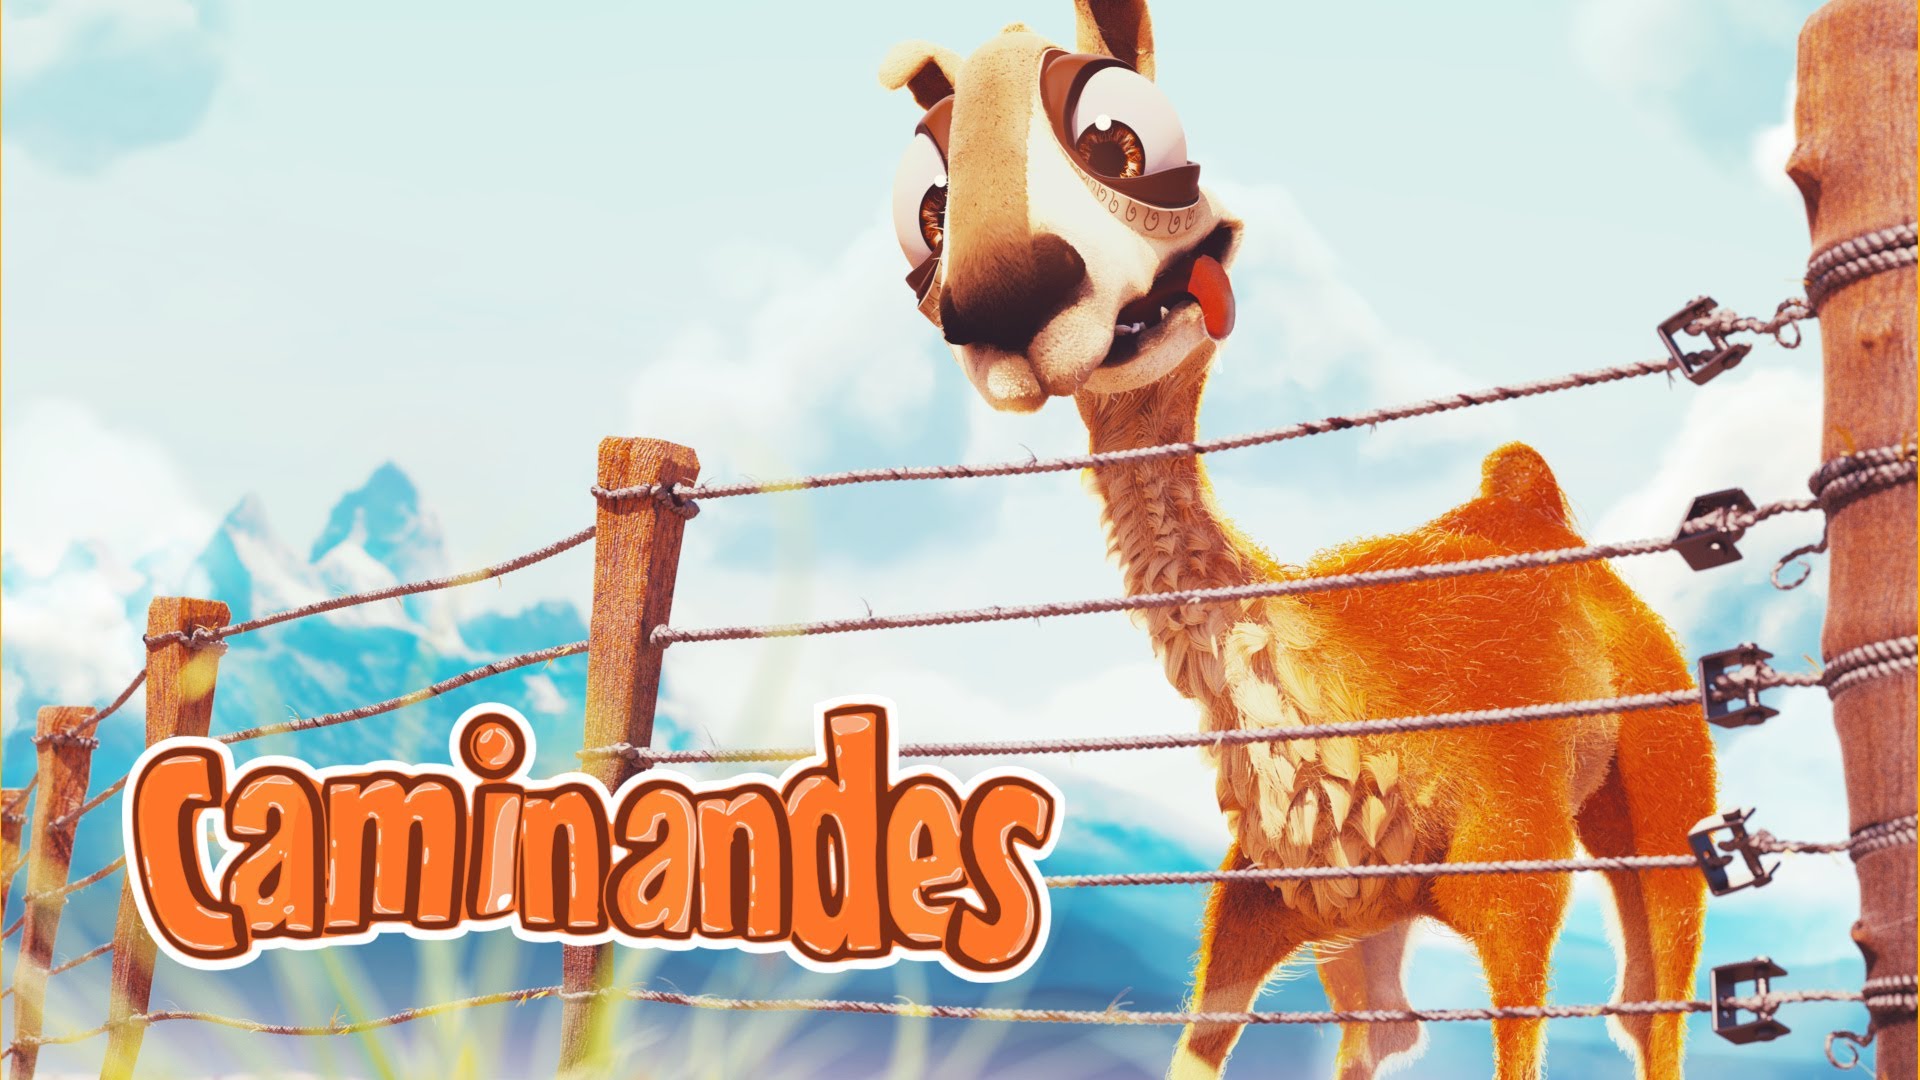 "Caminandes 2: Gran Dillama" - Blender Animated Short by Official Blender Open Movies